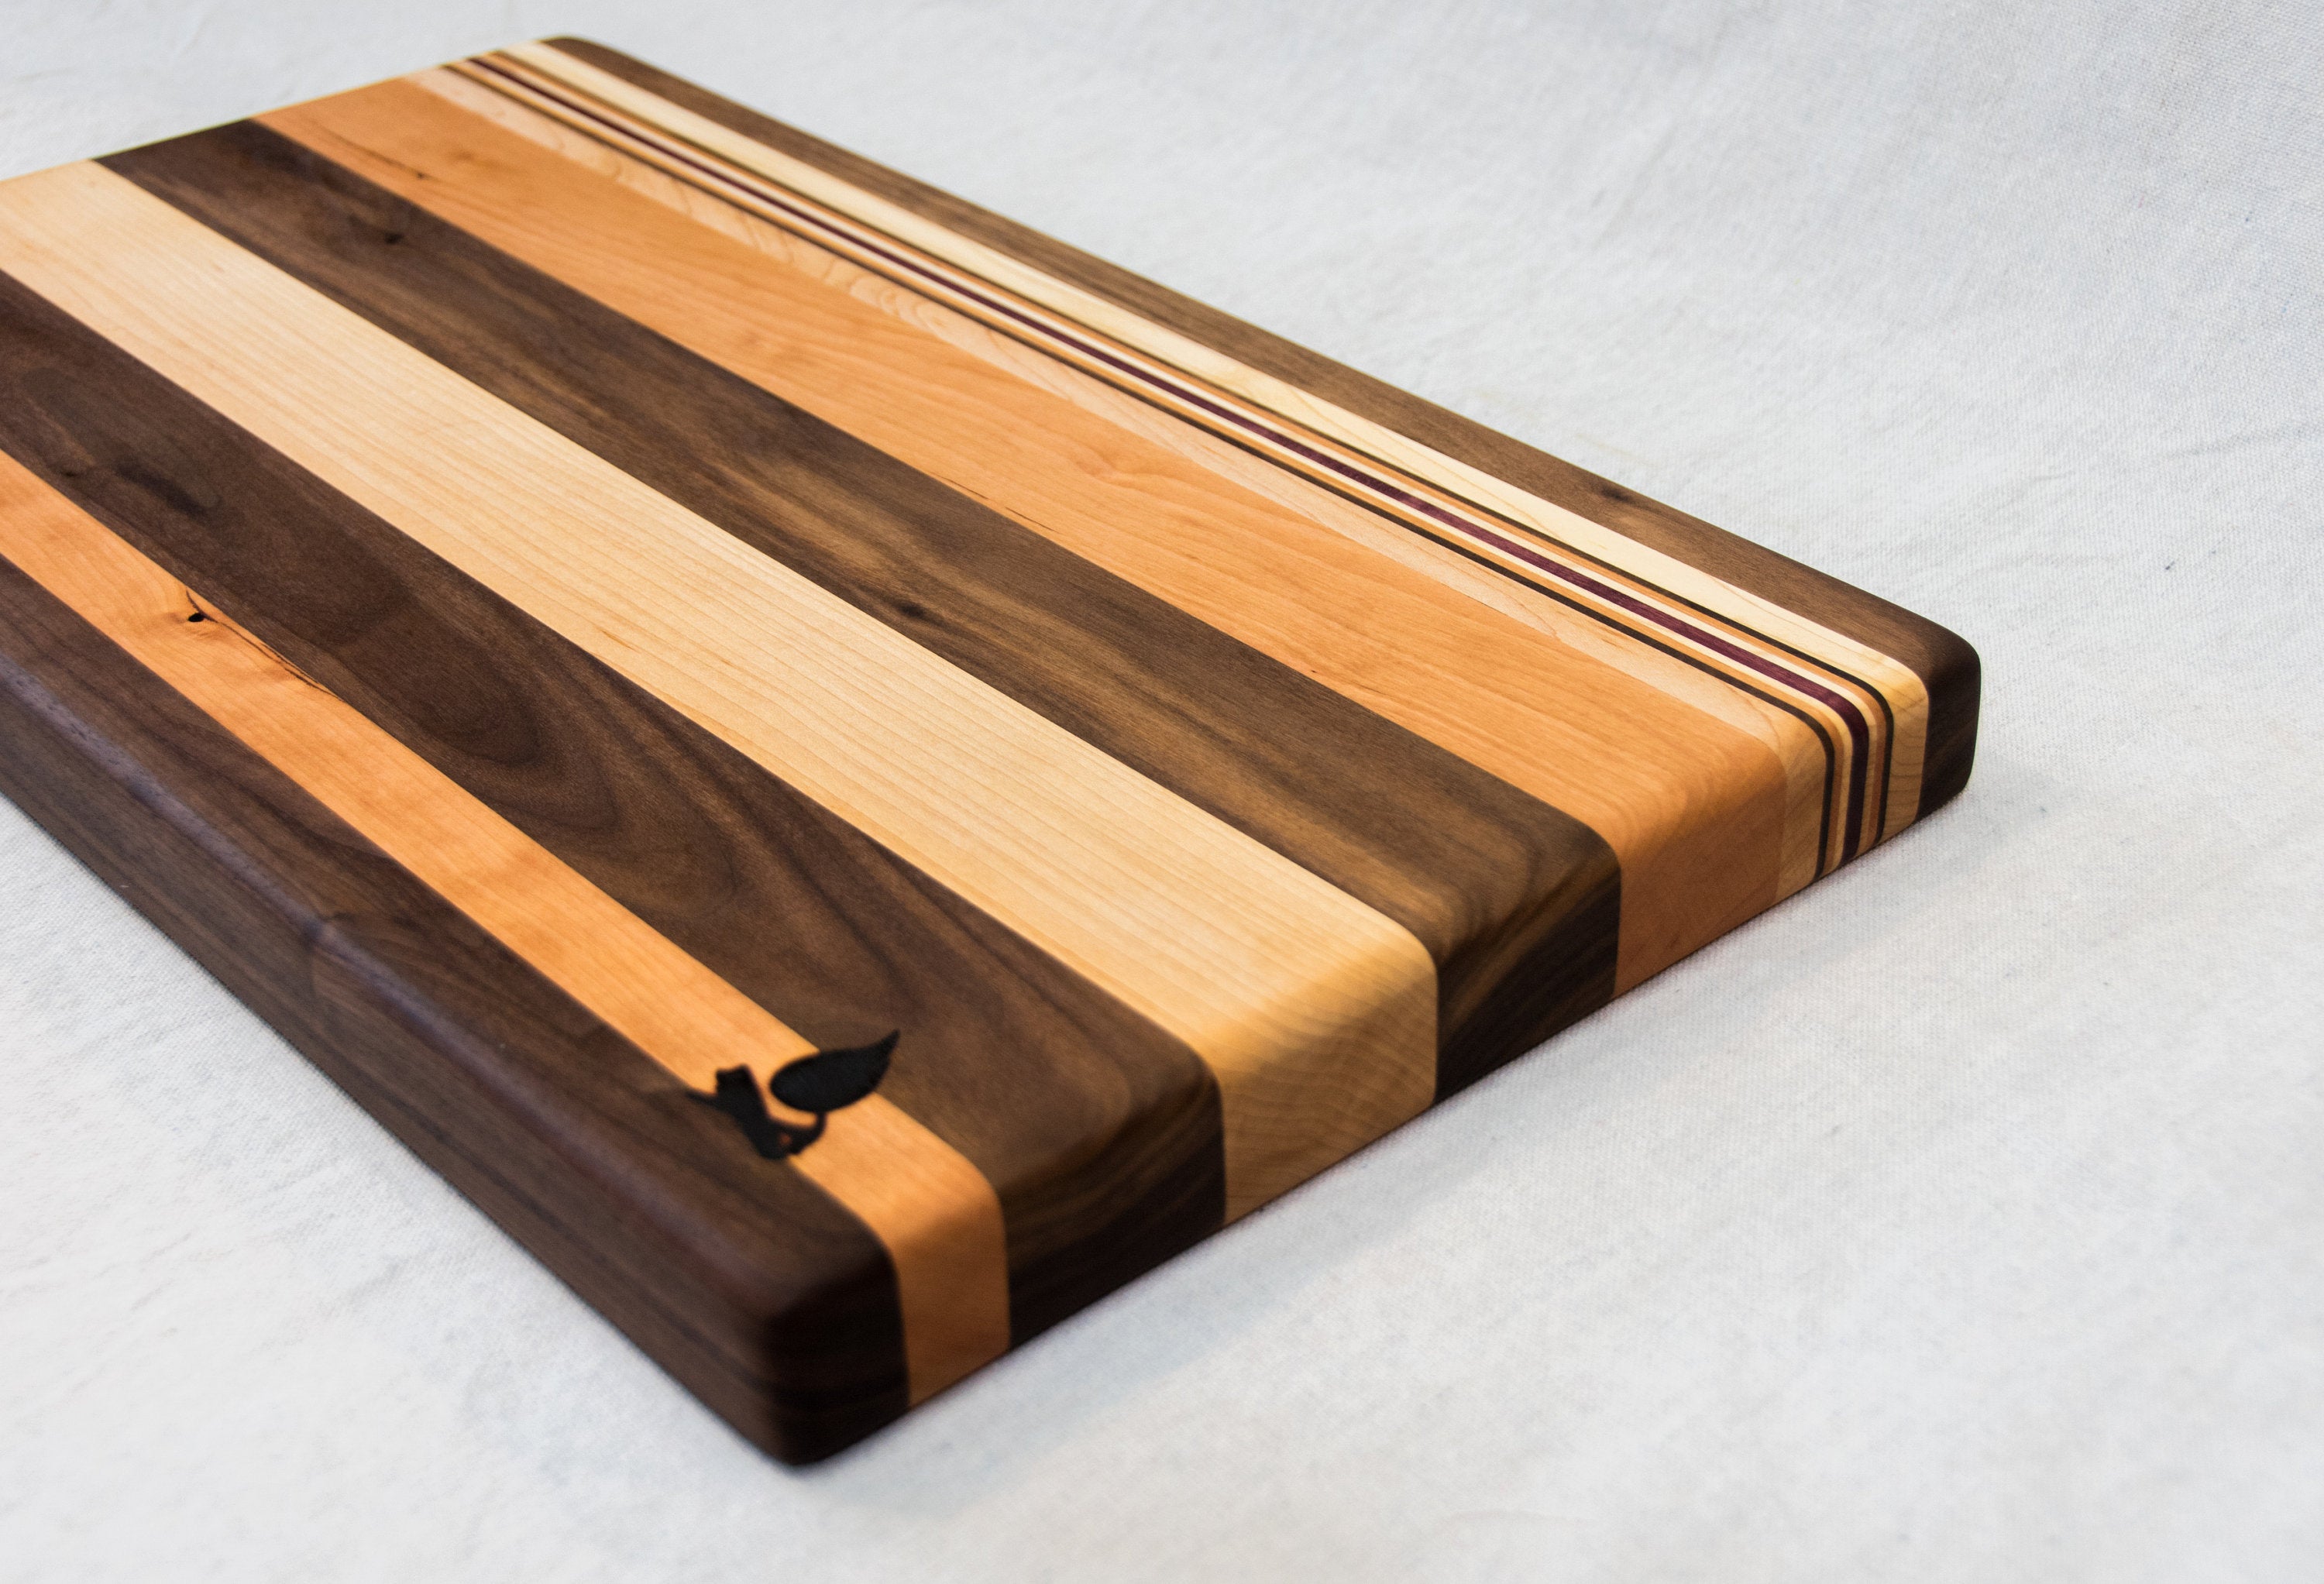 Cherry and Walnut with Handle Cutting Board